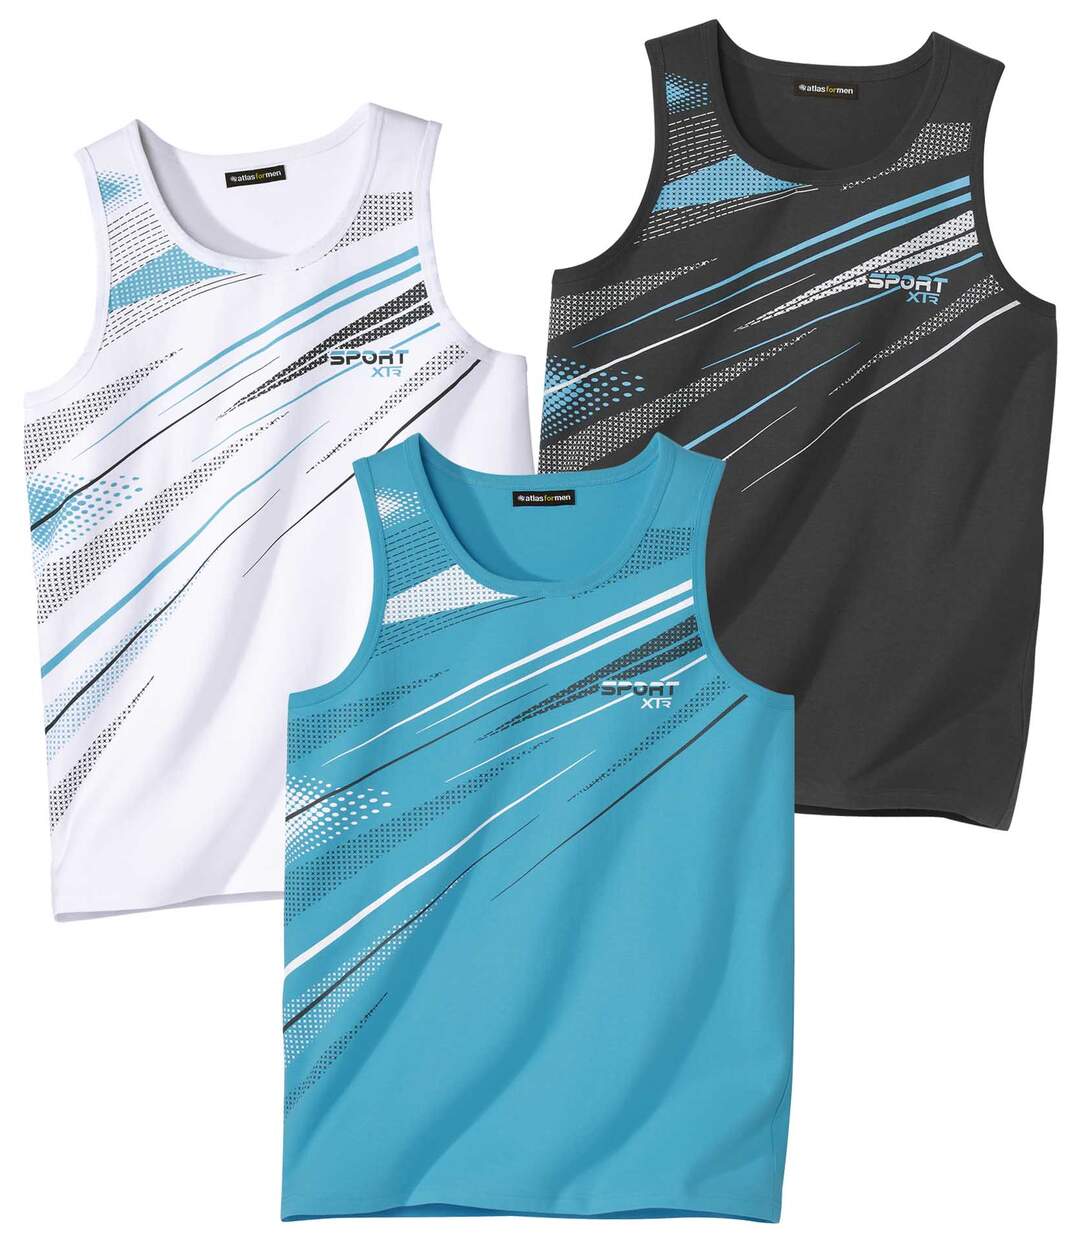 Pack of 3 Men's Graphic Print Tank Tops - Turquoise White Anthracite Atlas For Men